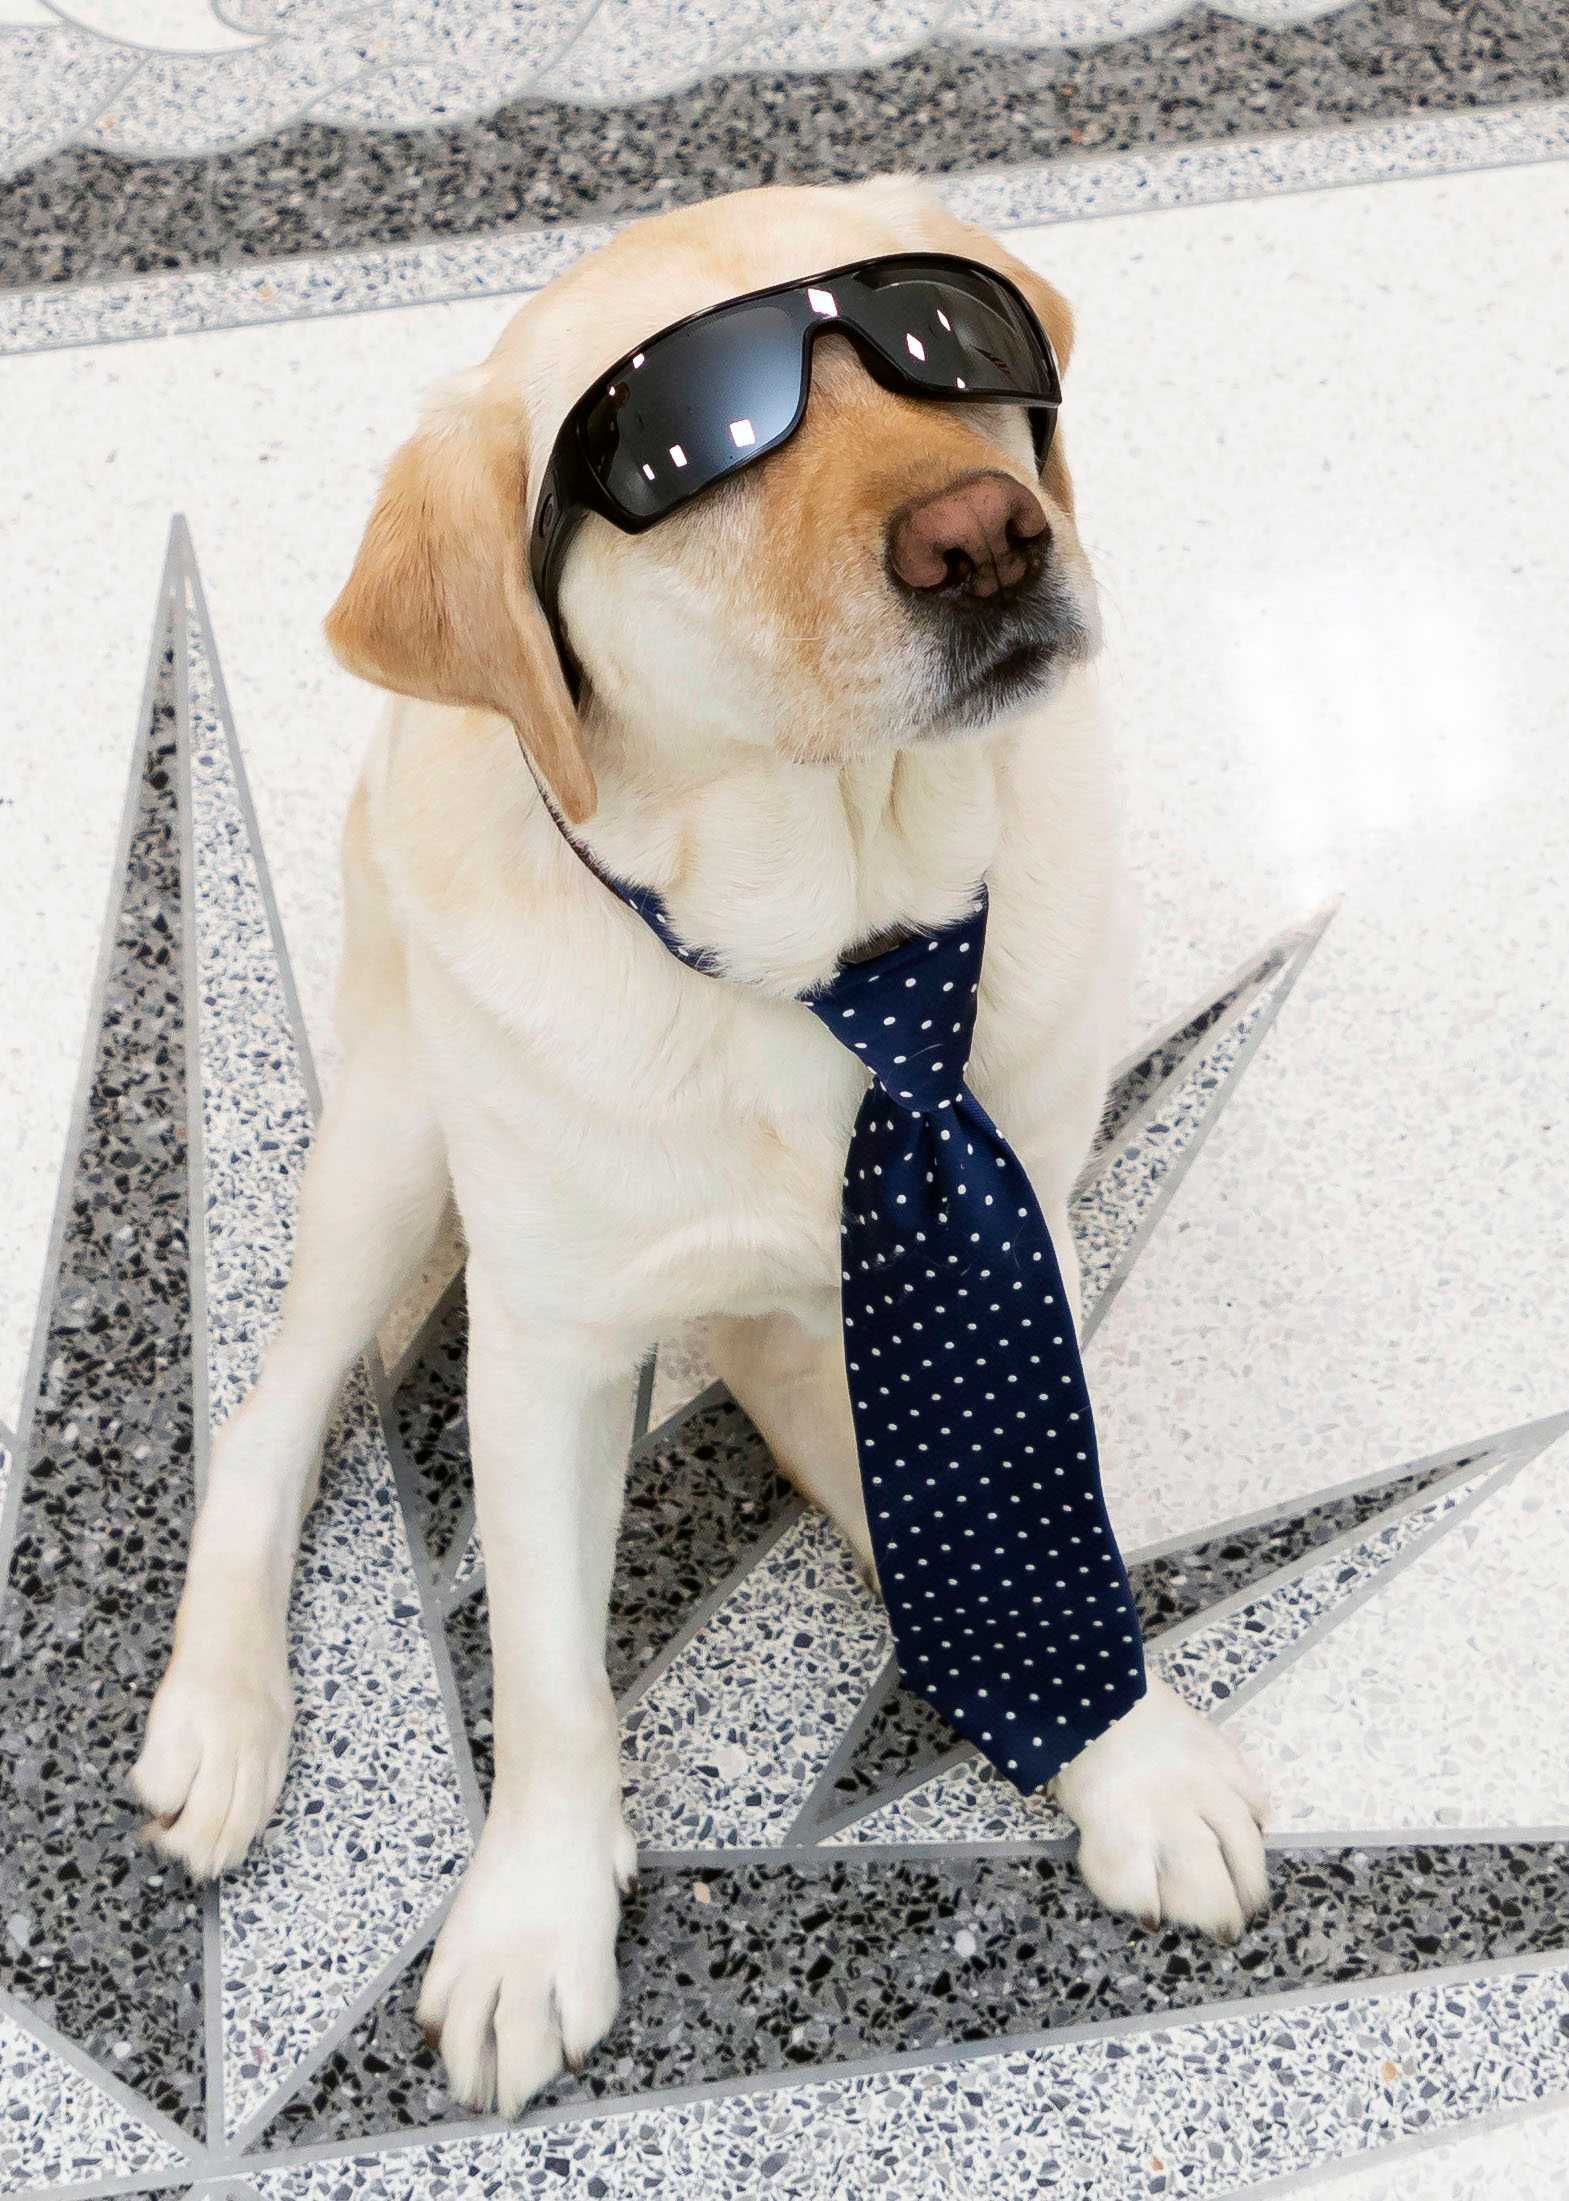 yellow dog wearing sunglasses and tie sitting on CIA seal.